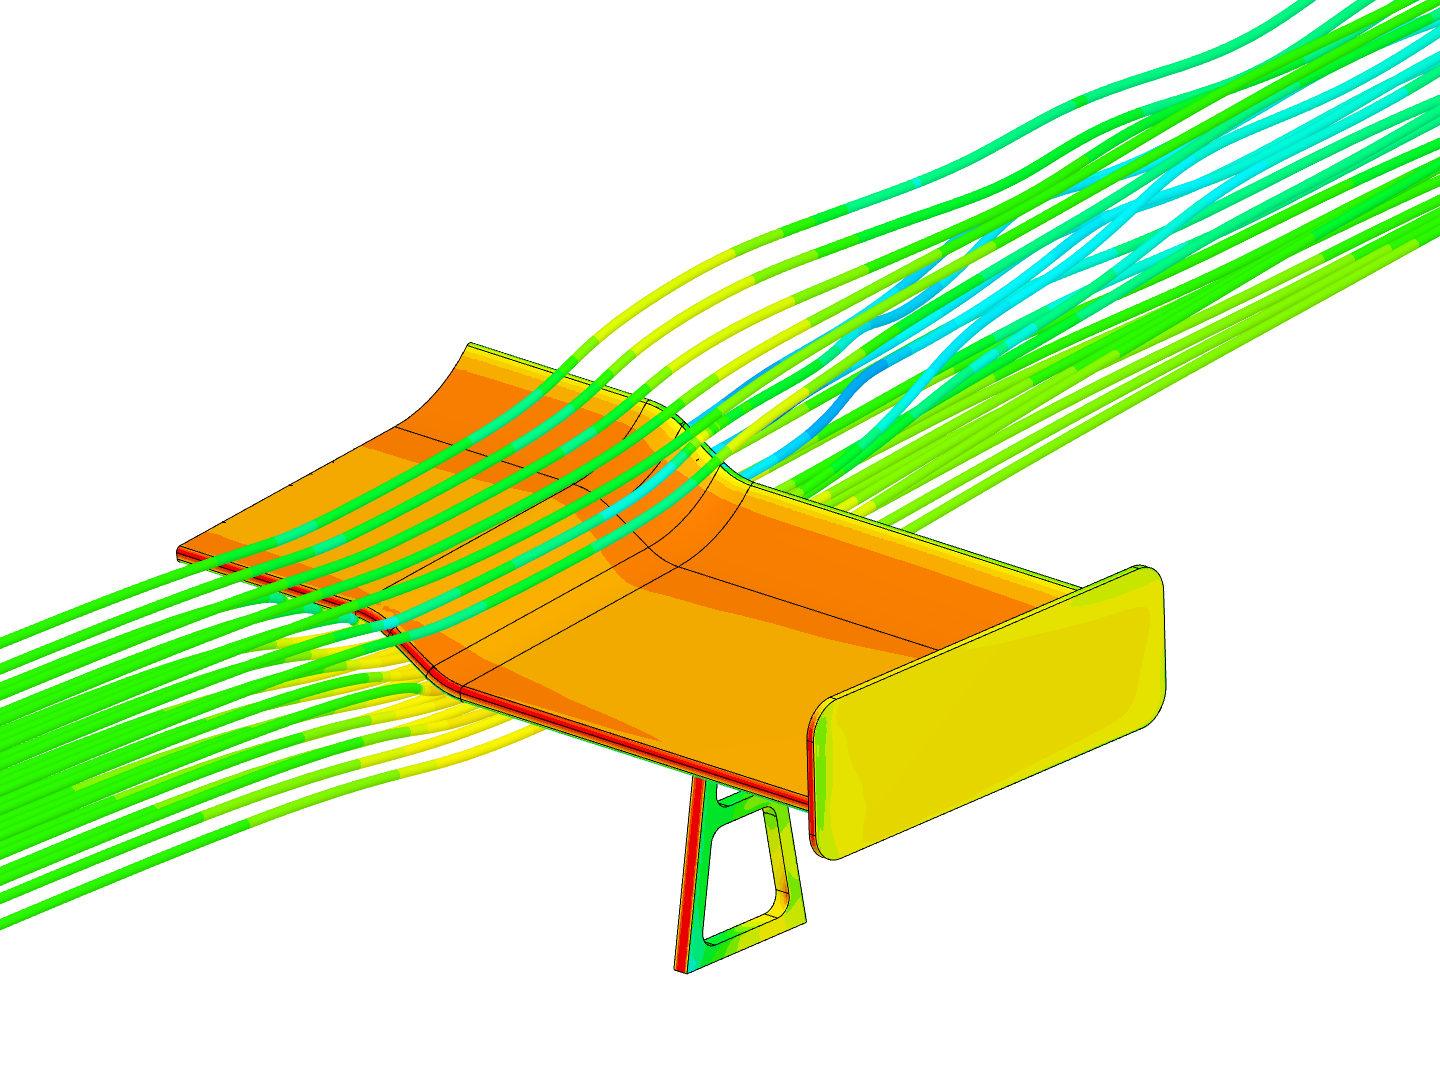 Learning module for Coursera - Airflow Around a GT Car Spoiler by Ayush image